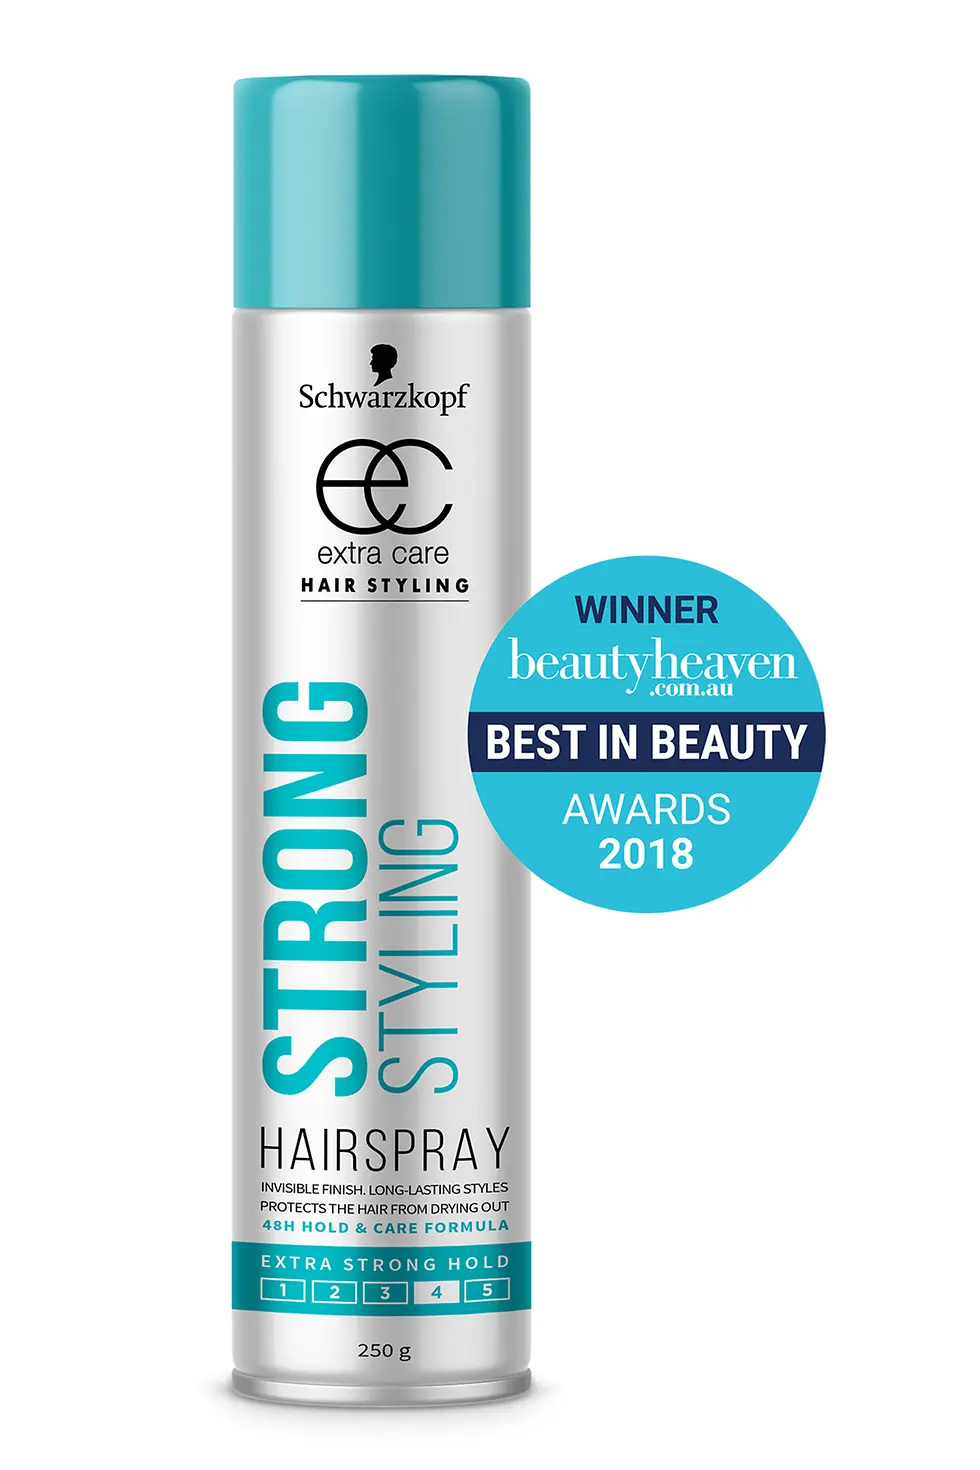 The Schwarzkopf Extra Care Strong Styling hairspray was voted as the Best Hairspray. It has an overall star rating of 4 out of 5 on beautyheaven.com.au.